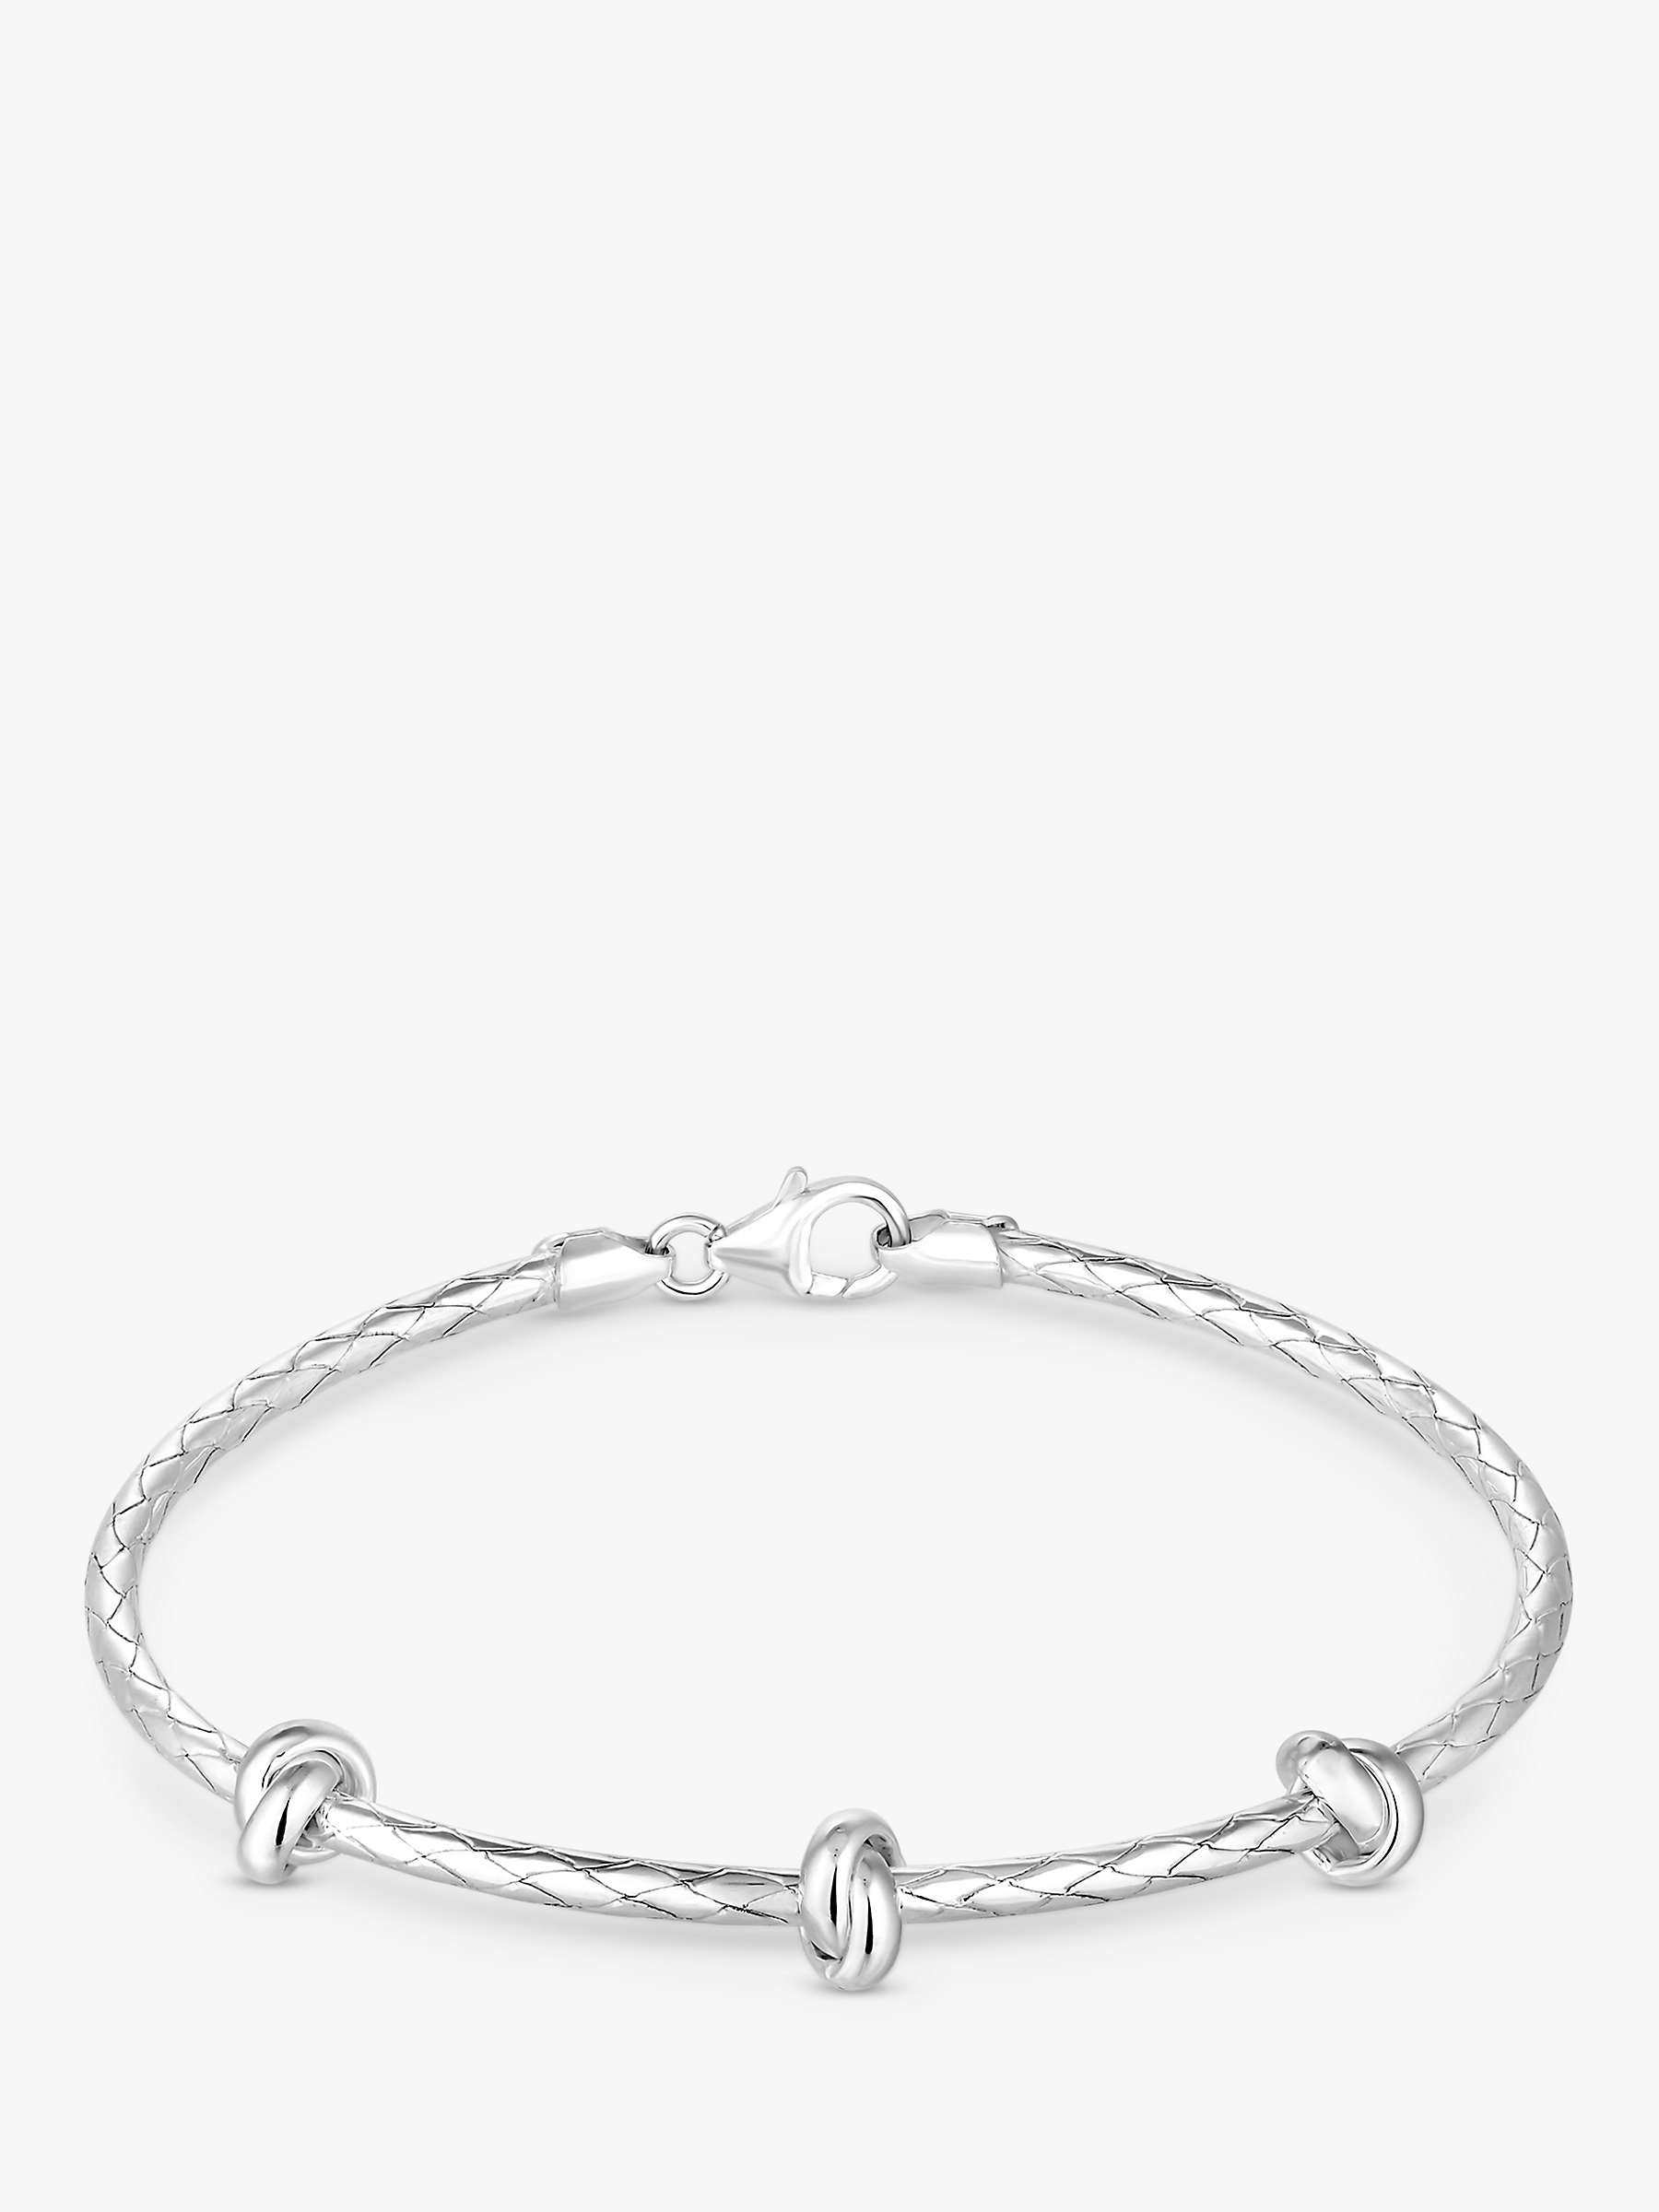 Buy Simply Silver Polished Knot Bangle, Silver Online at johnlewis.com